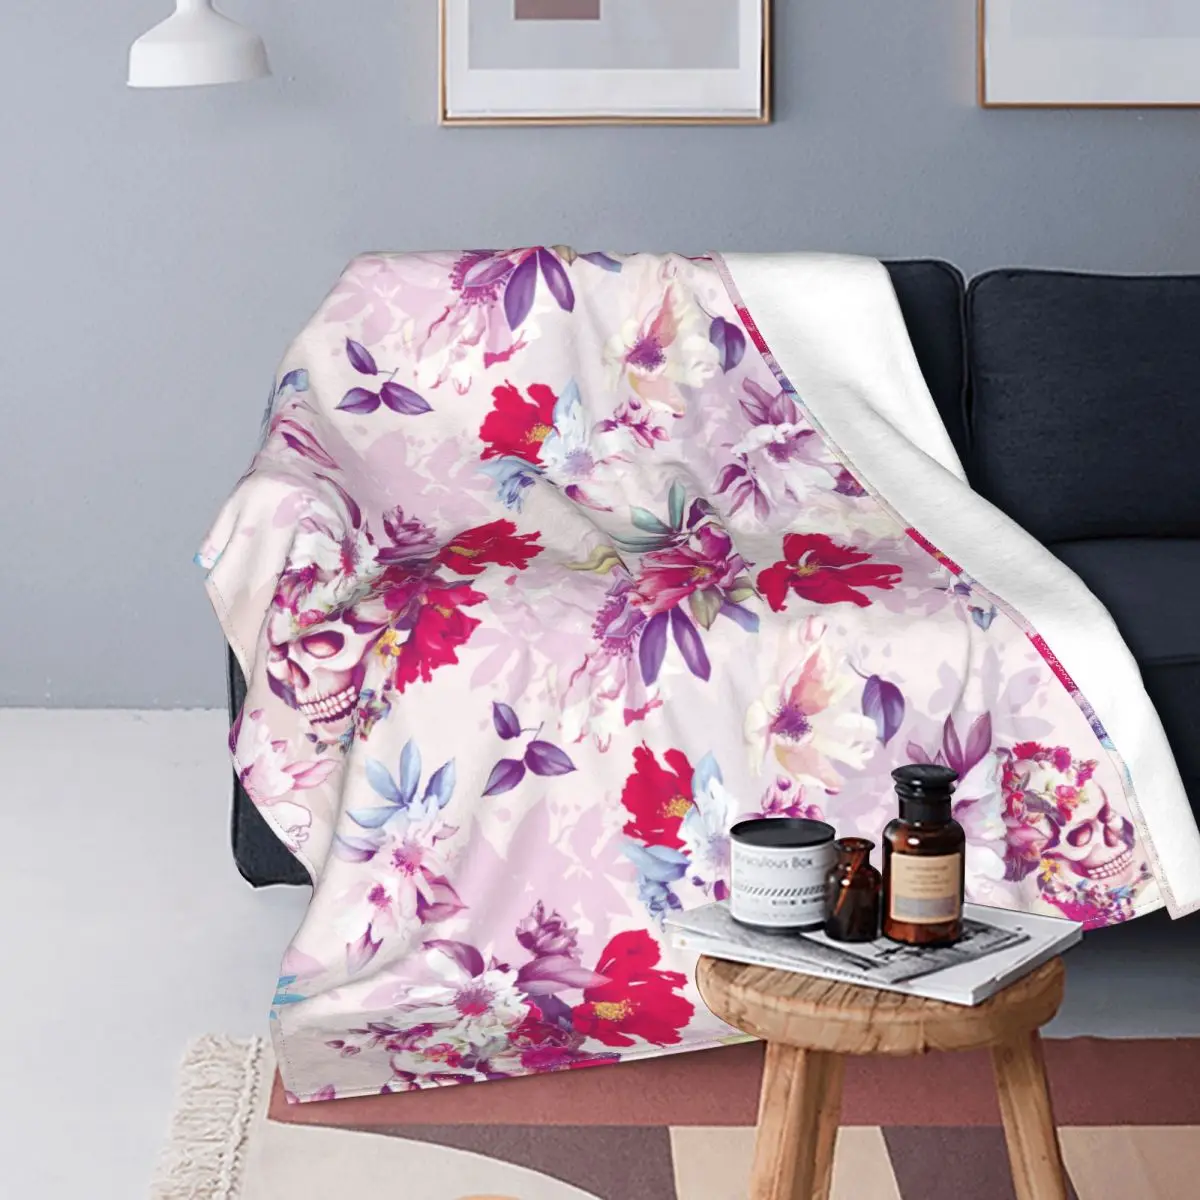 

Floral Skull Flannel Blankets Vintage Peony Awesome Throw Blanket for Bed Sofa Couch 150*125cm Quilt